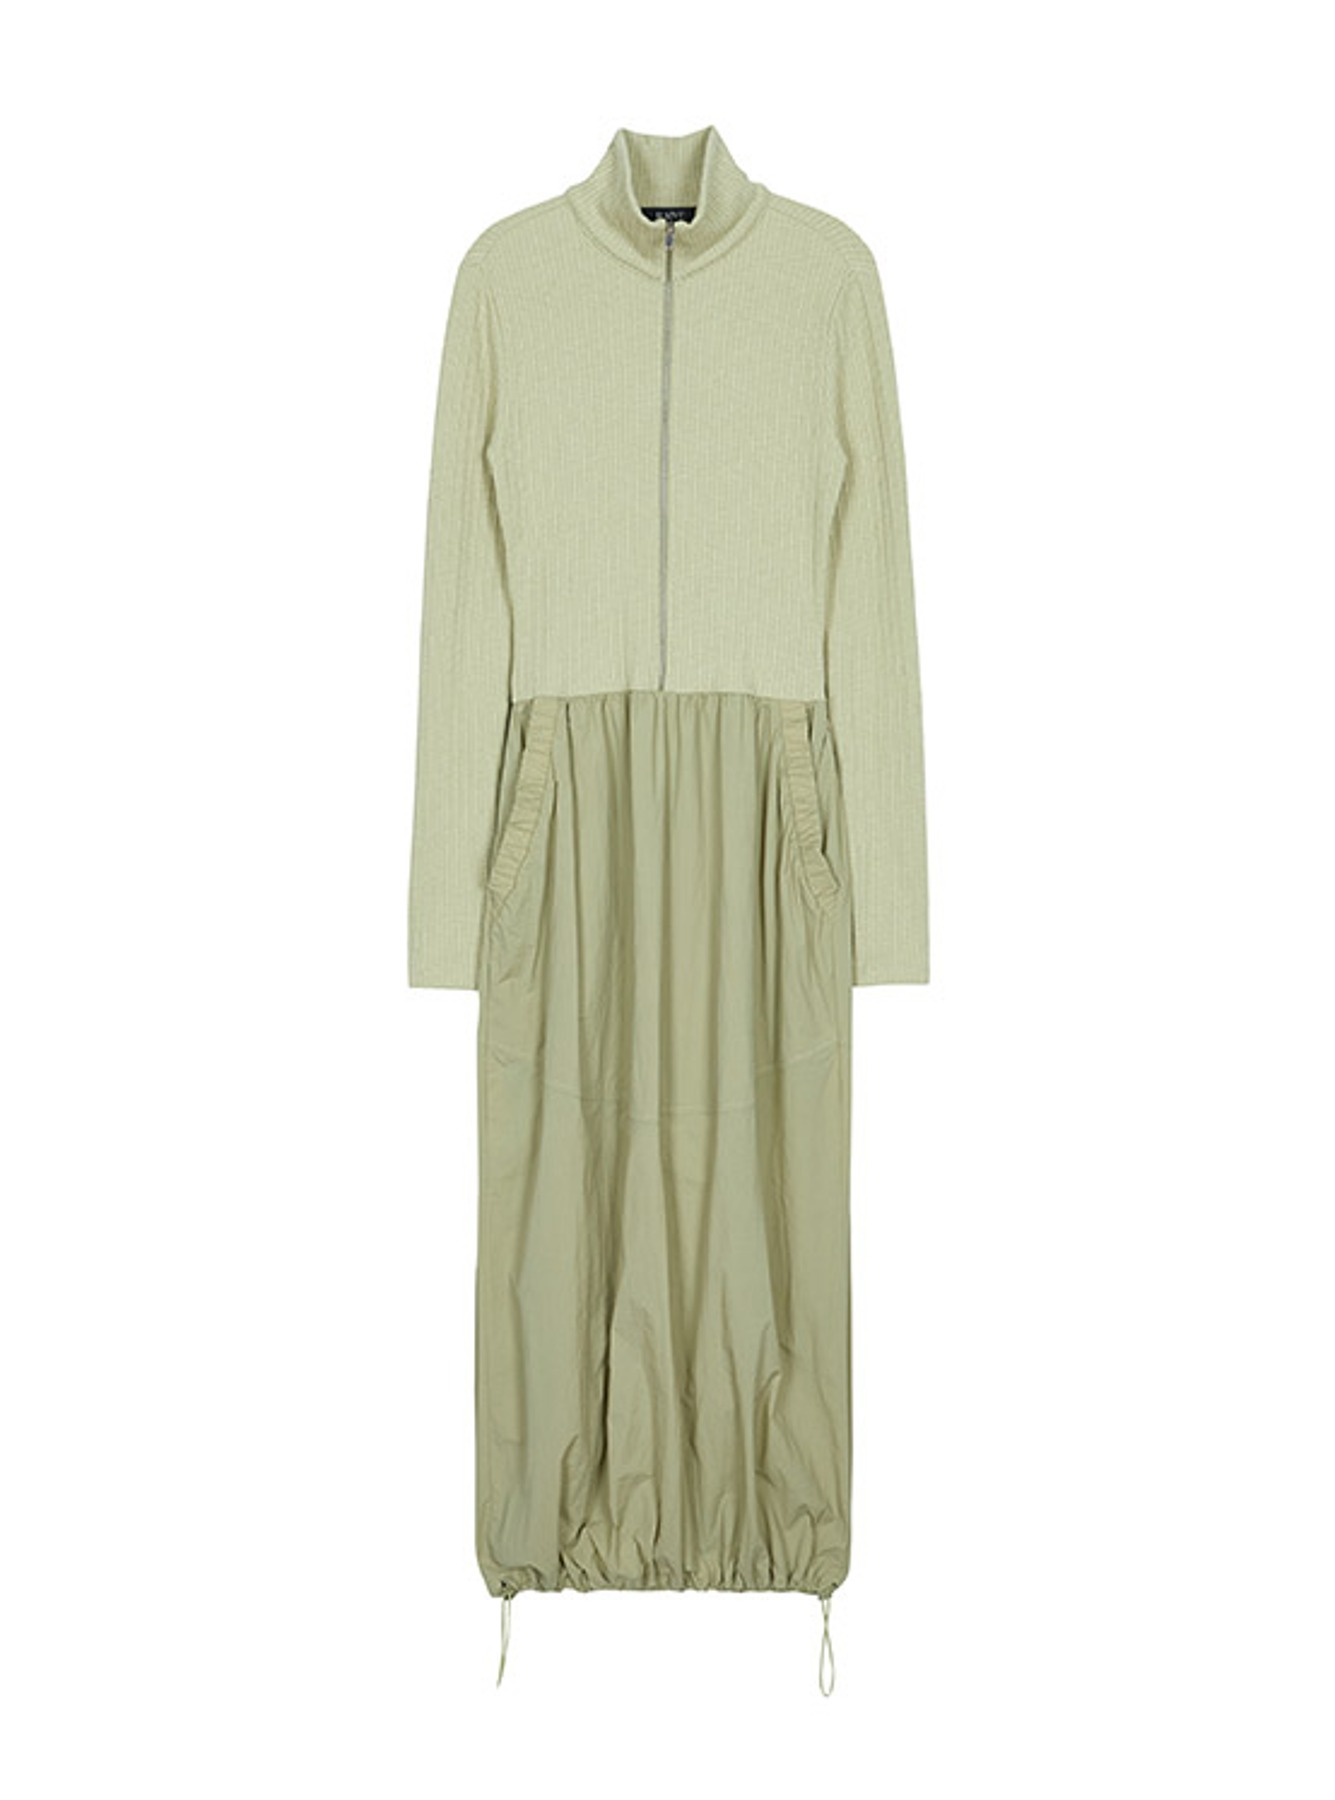 Volume String Long Onepiece in Olive VW2AO471-41